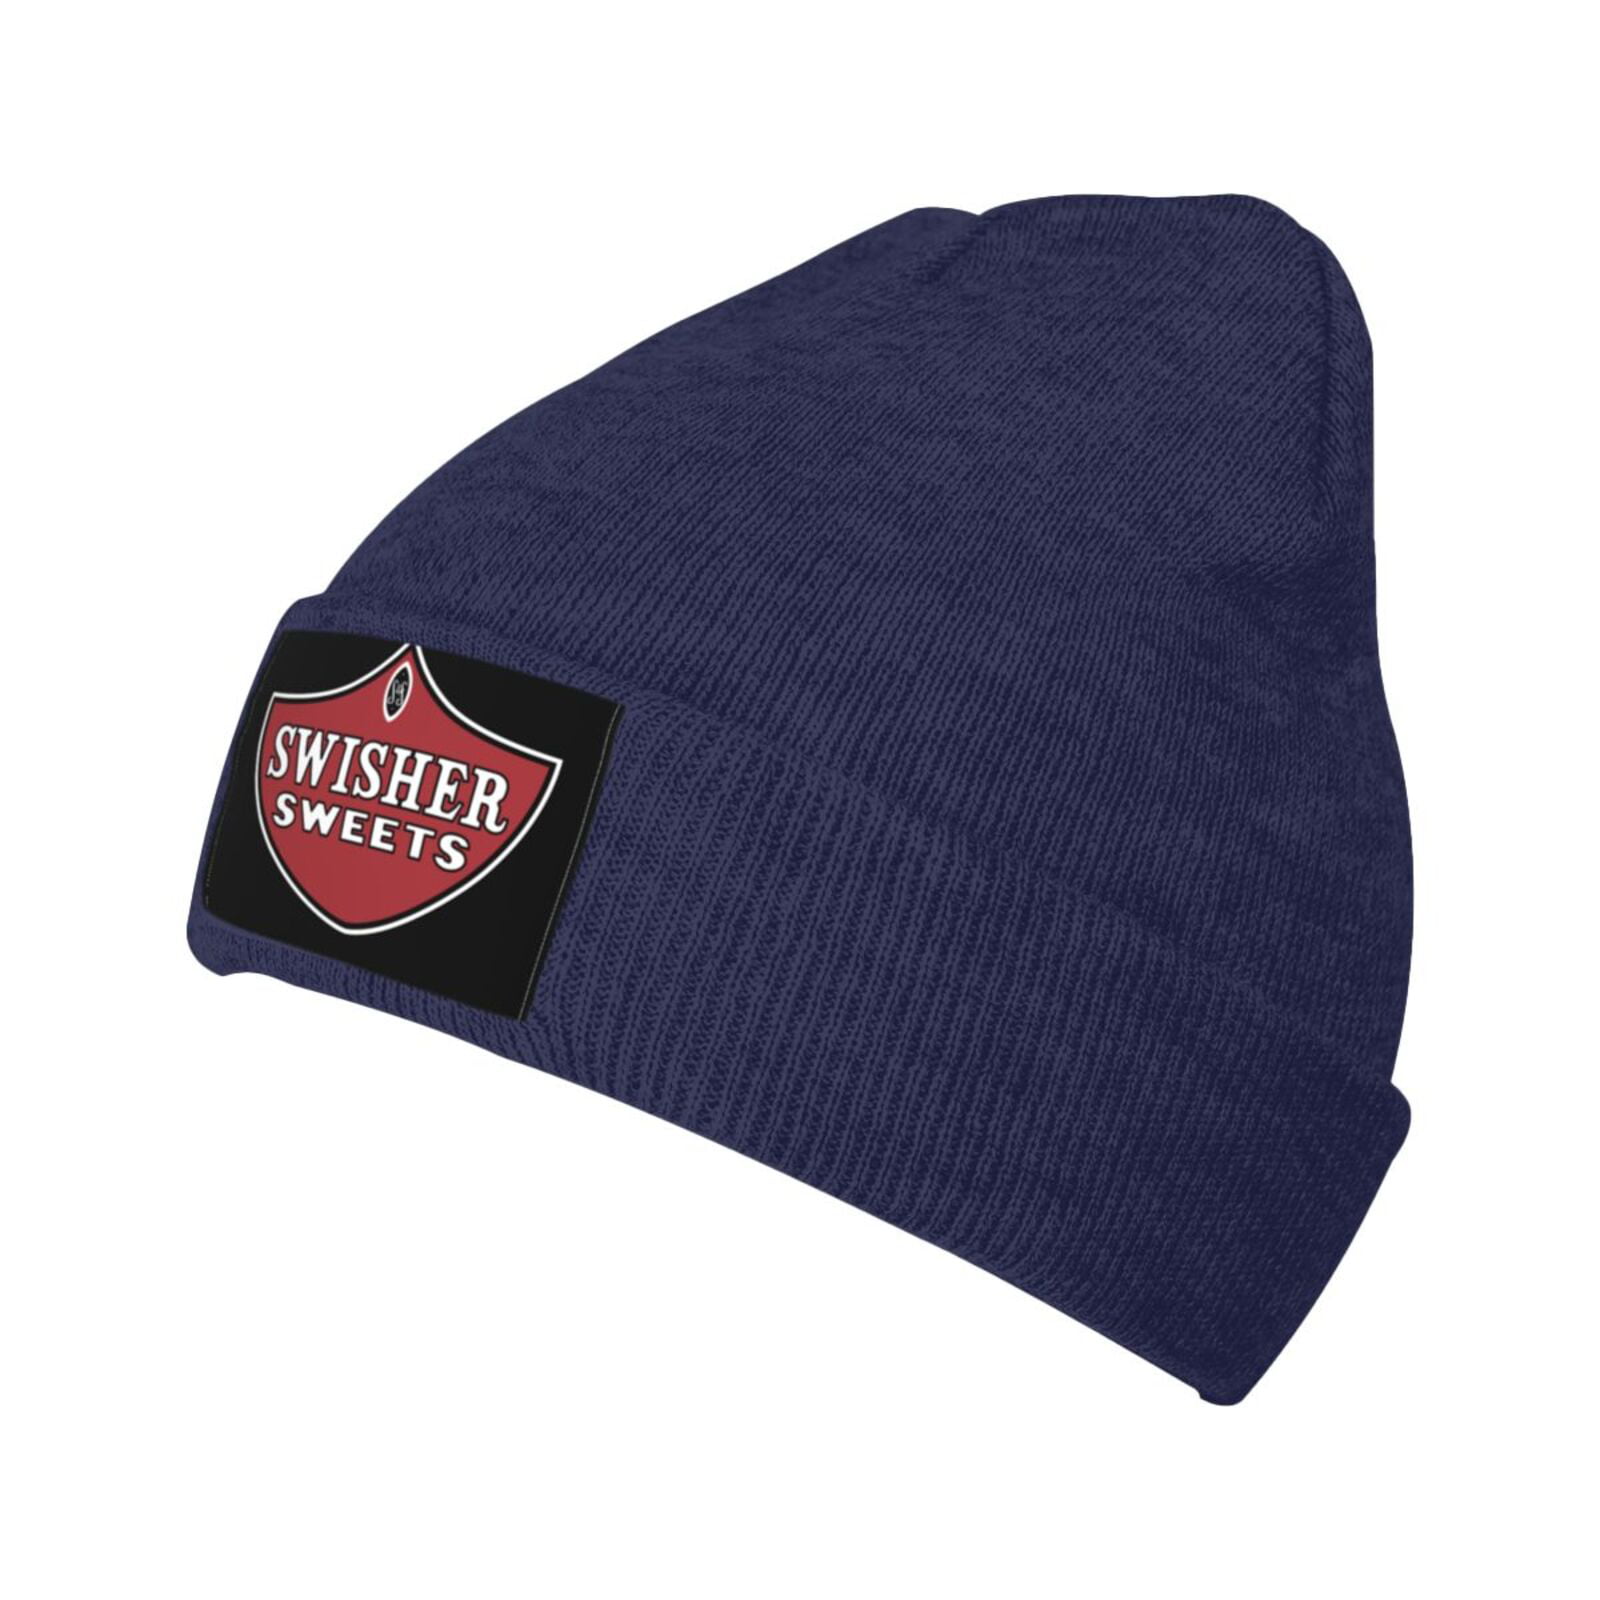 Cap Headwear Cap Sweets Beanie Adult Hat \\r\\nVikings Outdoor Slouchy Swisher Blue Stocking Softknit For Winter Navy